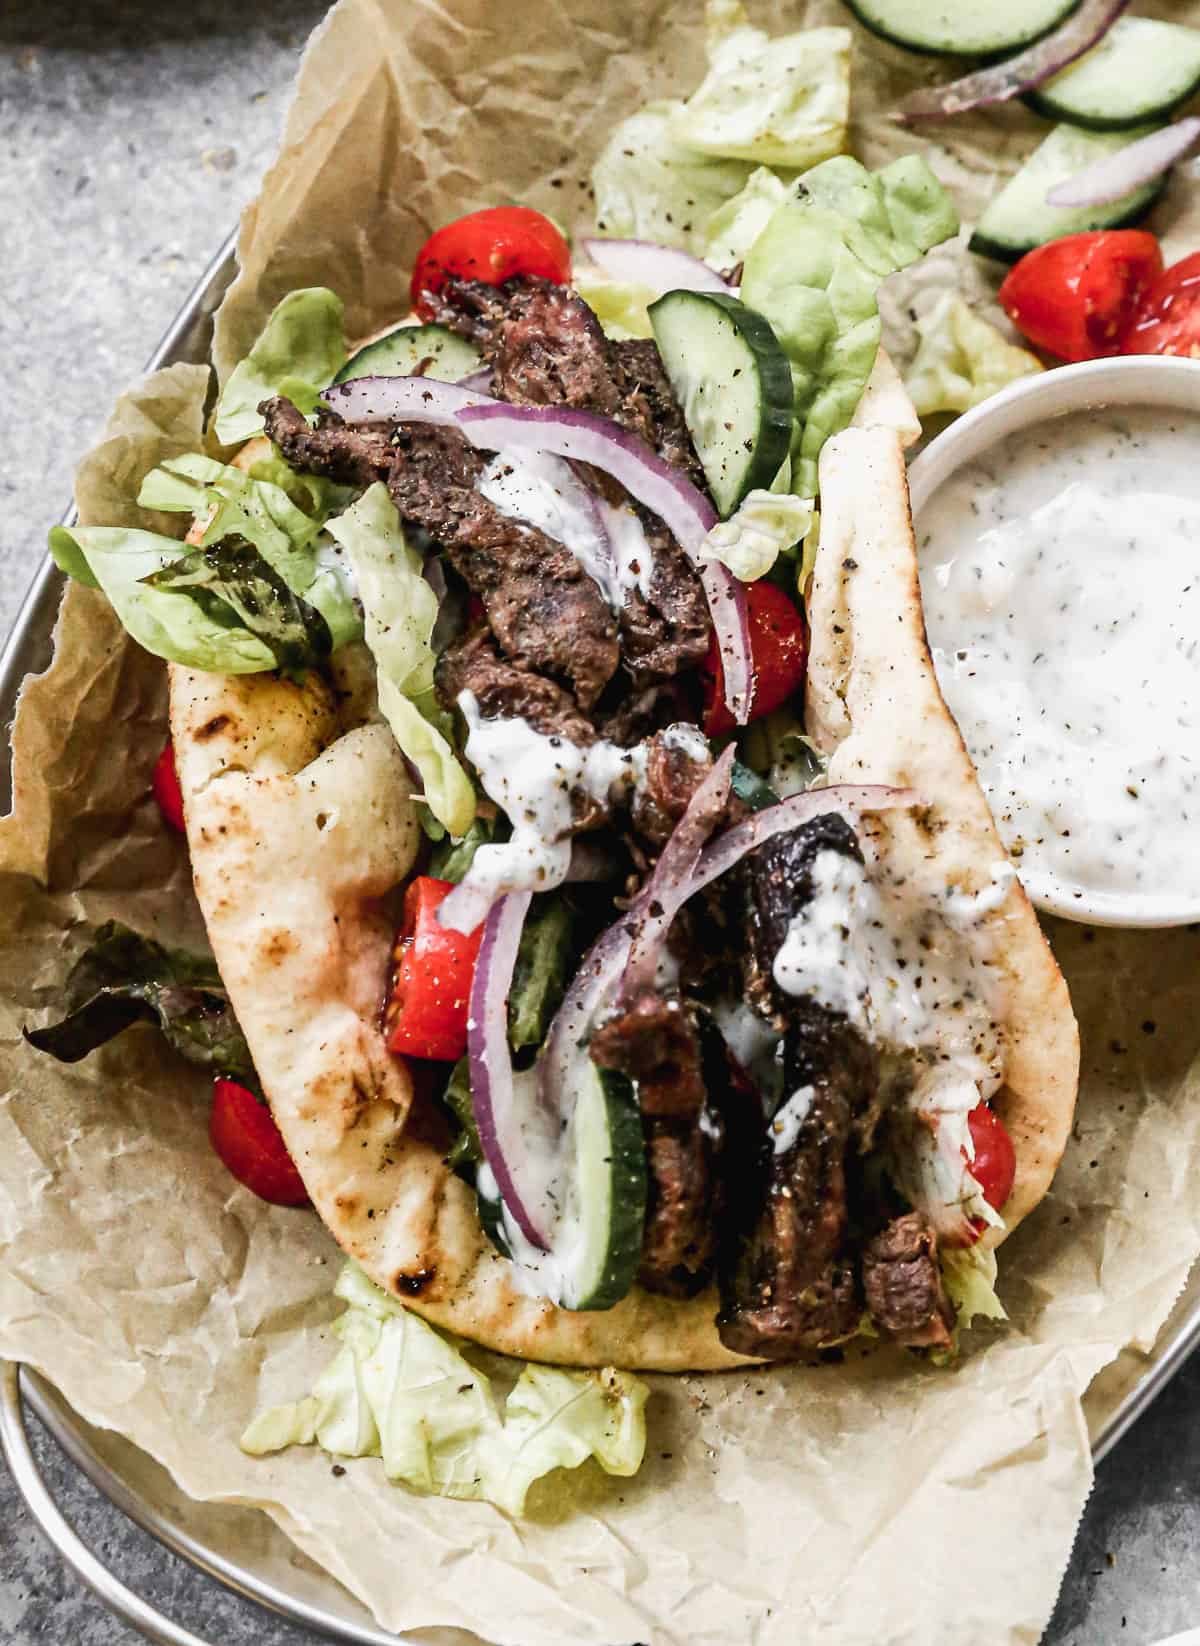 A close up image of a beef gyro with homemade tzatziki sauce and vegetables on top.